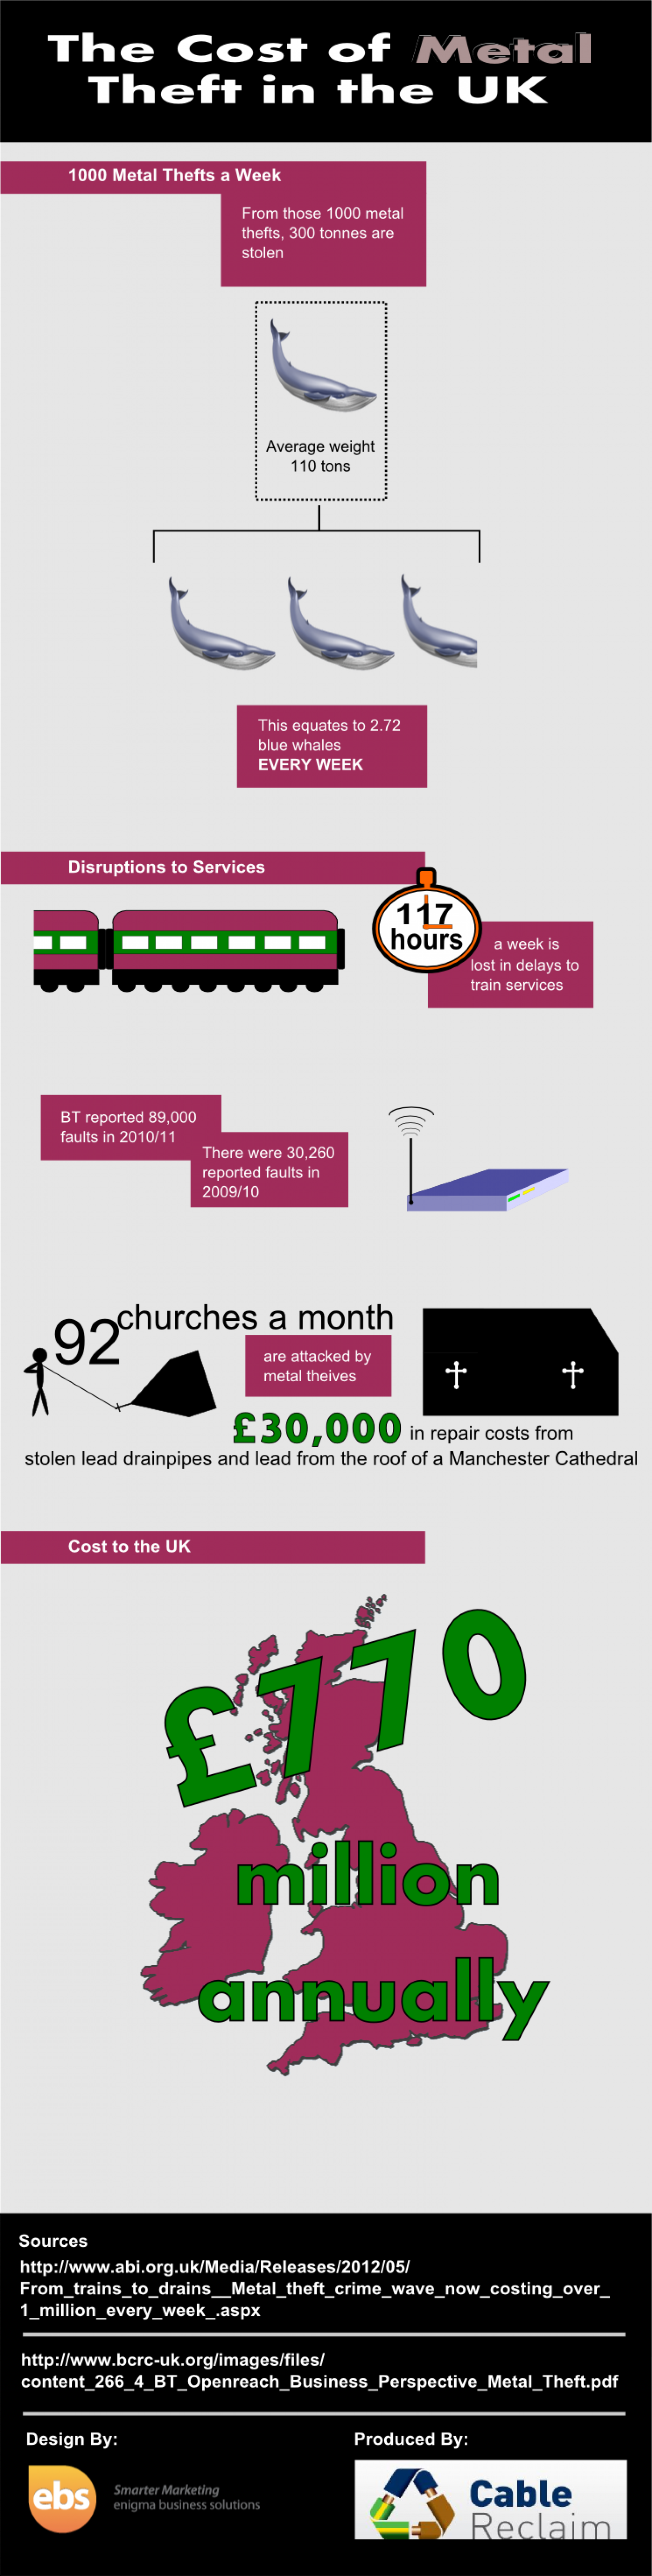 The Cost of Metal Theft in the UK Infographic